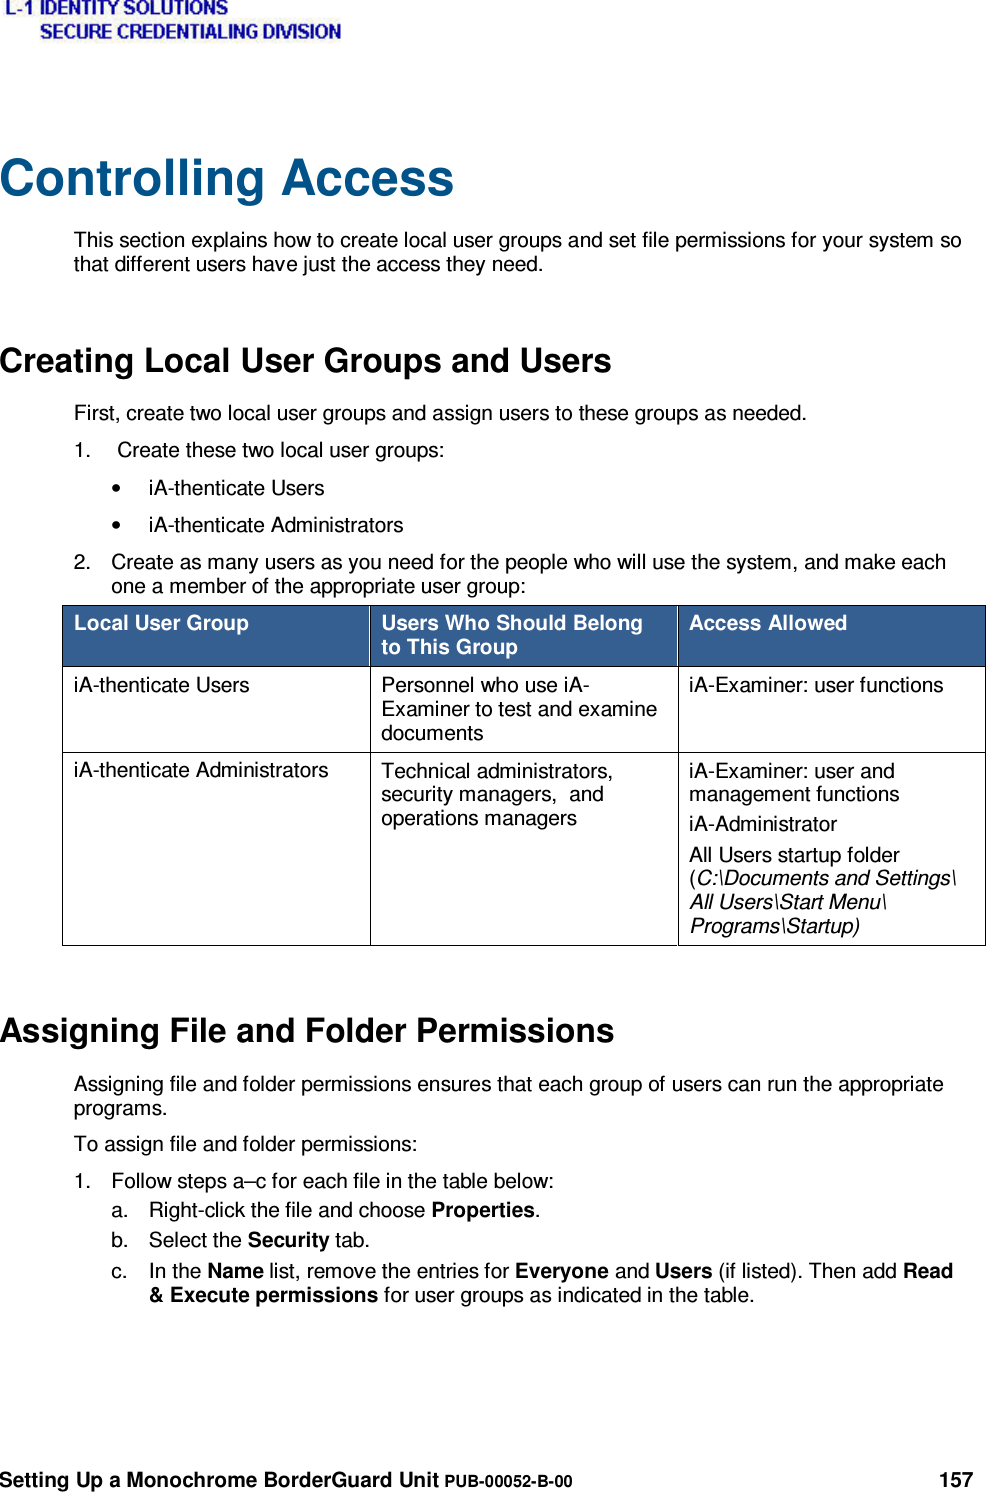  Setting Up a Monochrome BorderGuard Unit PUB-00052-B-00 157 Controlling Access This section explains how to create local user groups and set file permissions for your system so that different users have just the access they need. Creating Local User Groups and Users First, create two local user groups and assign users to these groups as needed. 1.   Create these two local user groups: • iA-thenticate Users • iA-thenticate Administrators 2.  Create as many users as you need for the people who will use the system, and make each one a member of the appropriate user group: Local User Group  Users Who Should Belong to This Group Access Allowed iA-thenticate Users  Personnel who use iA-Examiner to test and examine documents iA-Examiner: user functions iA-thenticate Administrators  Technical administrators, security managers,  and operations managers iA-Examiner: user and management functions iA-Administrator All Users startup folder (C:\Documents and Settings\ All Users\Start Menu\ Programs\Startup) Assigning File and Folder Permissions Assigning file and folder permissions ensures that each group of users can run the appropriate programs. To assign file and folder permissions: 1.  Follow steps a–c for each file in the table below: a.  Right-click the file and choose Properties. b. Select the Security tab. c. In the Name list, remove the entries for Everyone and Users (if listed). Then add Read &amp; Execute permissions for user groups as indicated in the table.    